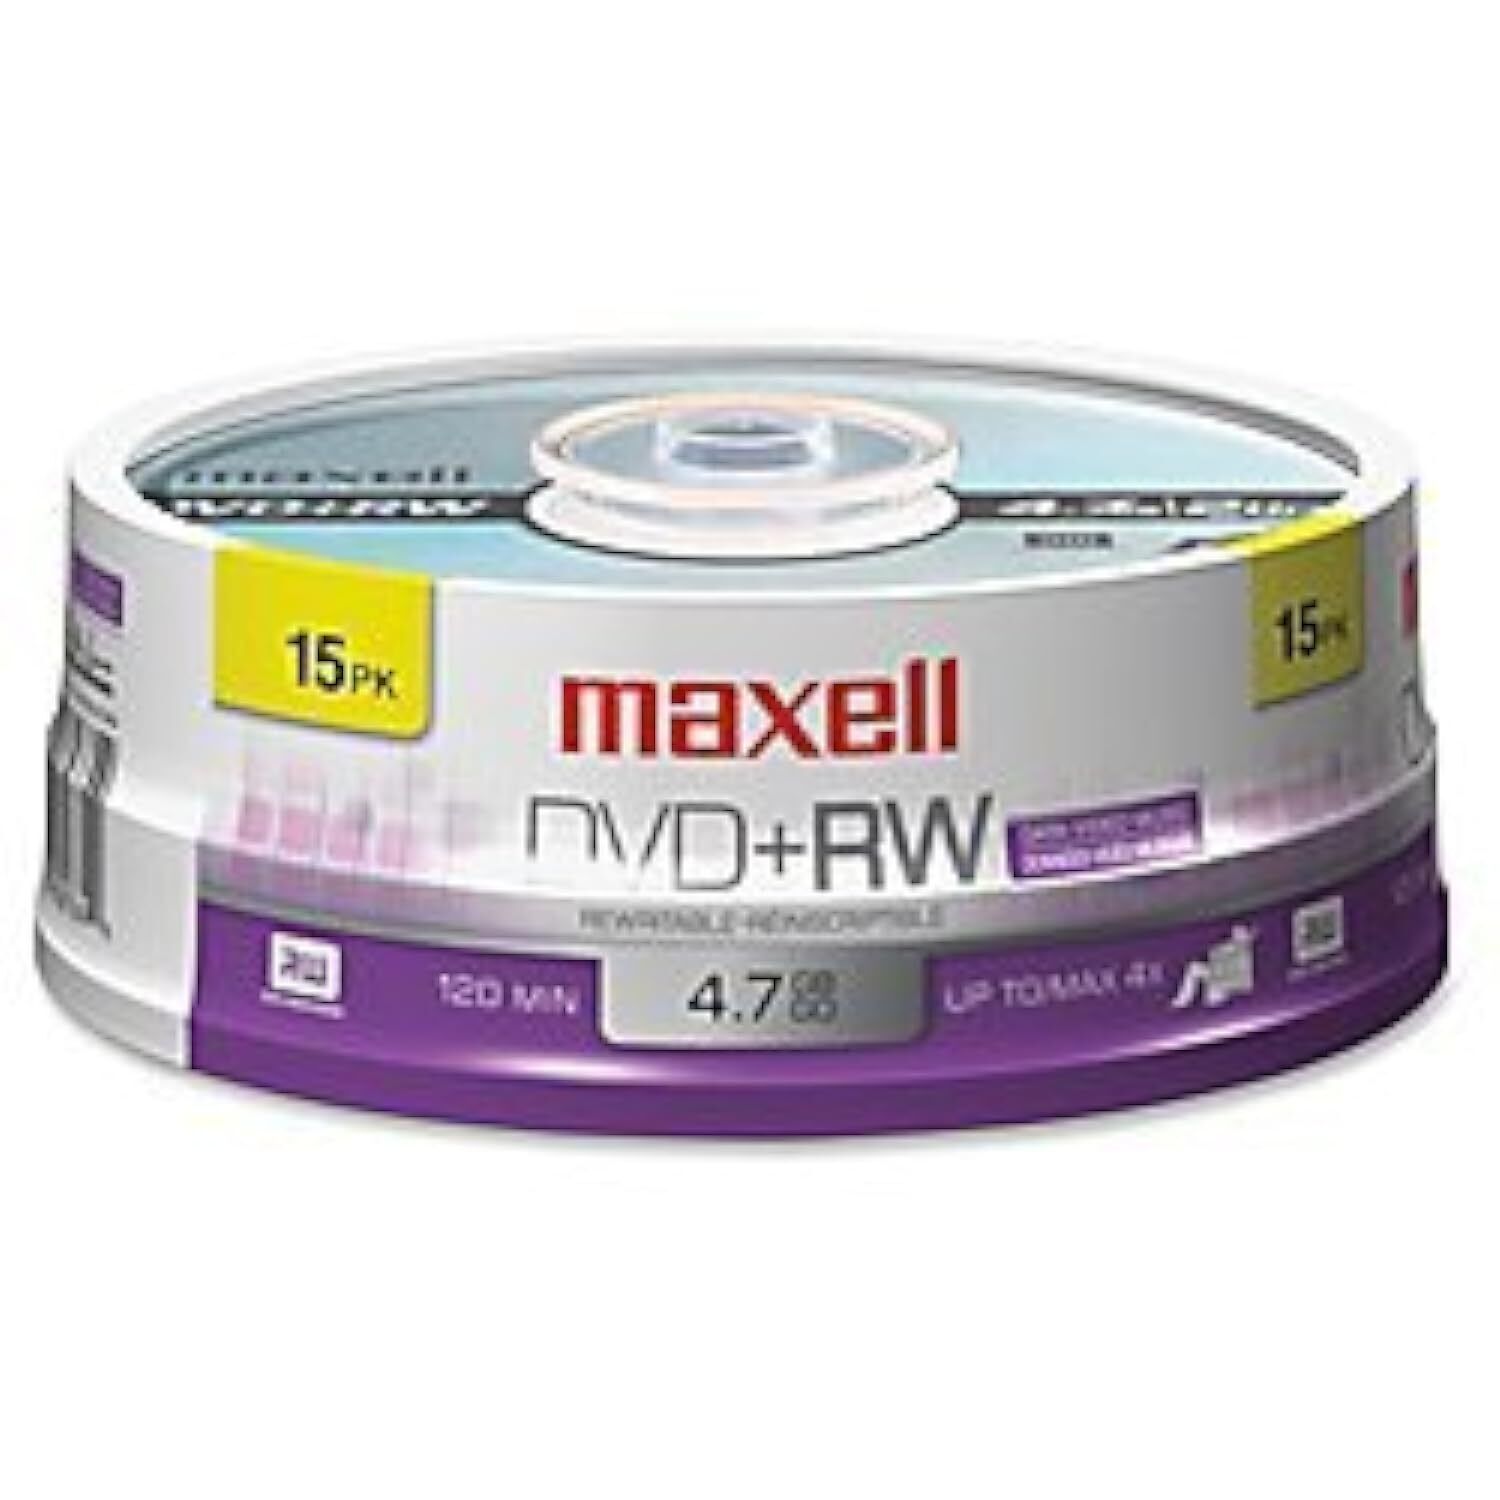 Maxell Dvd+Rw Rewritable Disc, 4.7 Gb, 4X, Spindle, Silver, 15/Pack